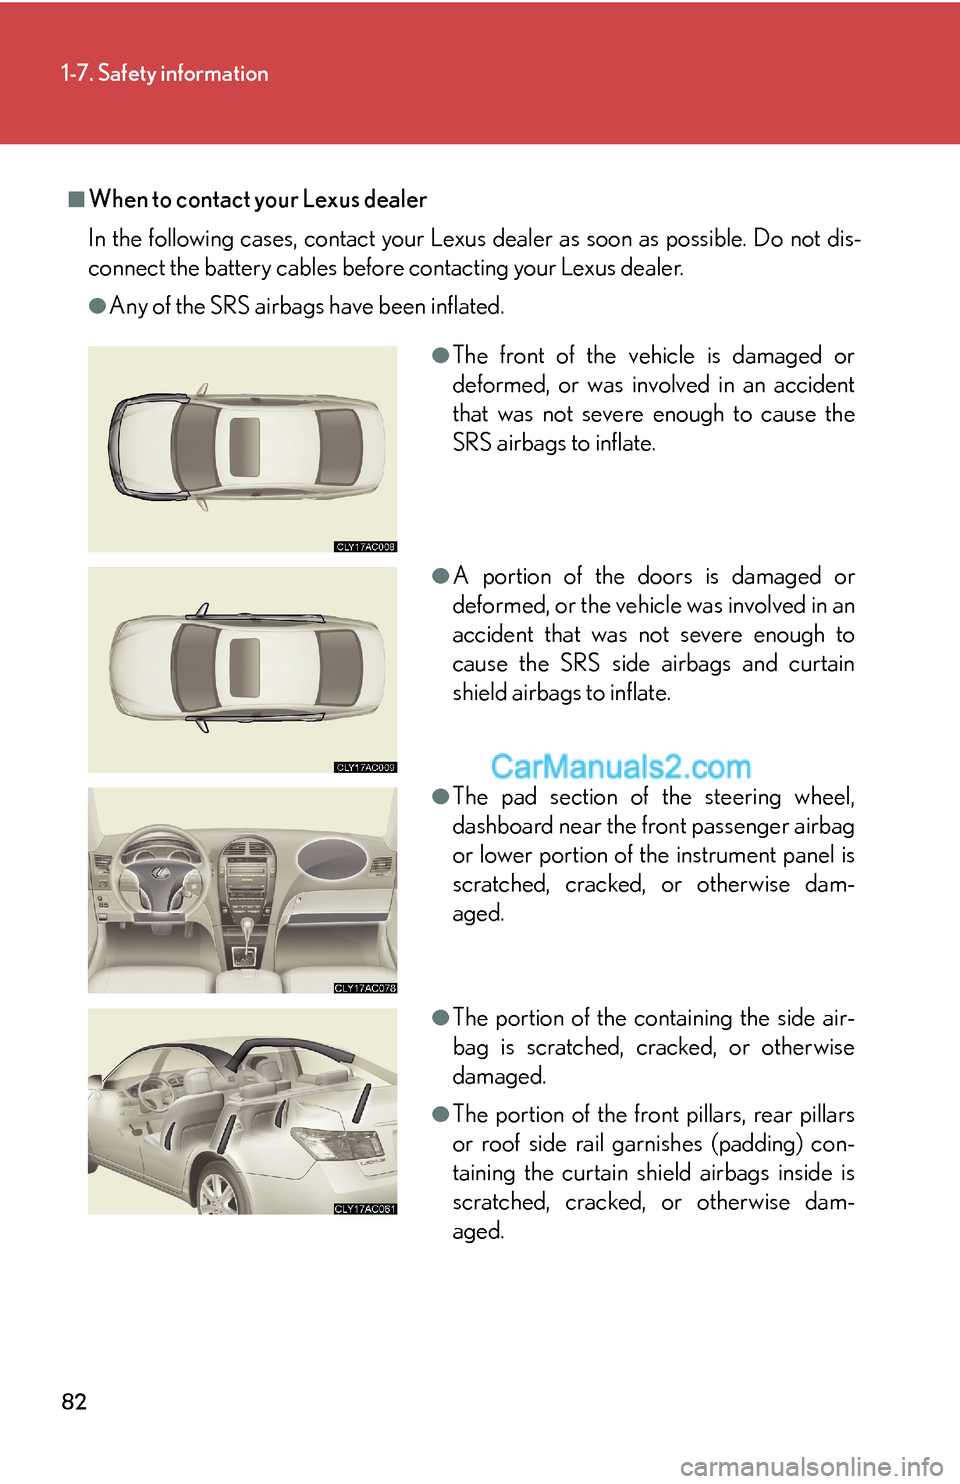 Lexus ES350 2008  Safety information 82
1-7. Safety information
■When to contact your Lexus dealer
In the following cases, contact your Lexus dealer as soon as possible. Do not dis-
connect the battery cables before contacting your Lex